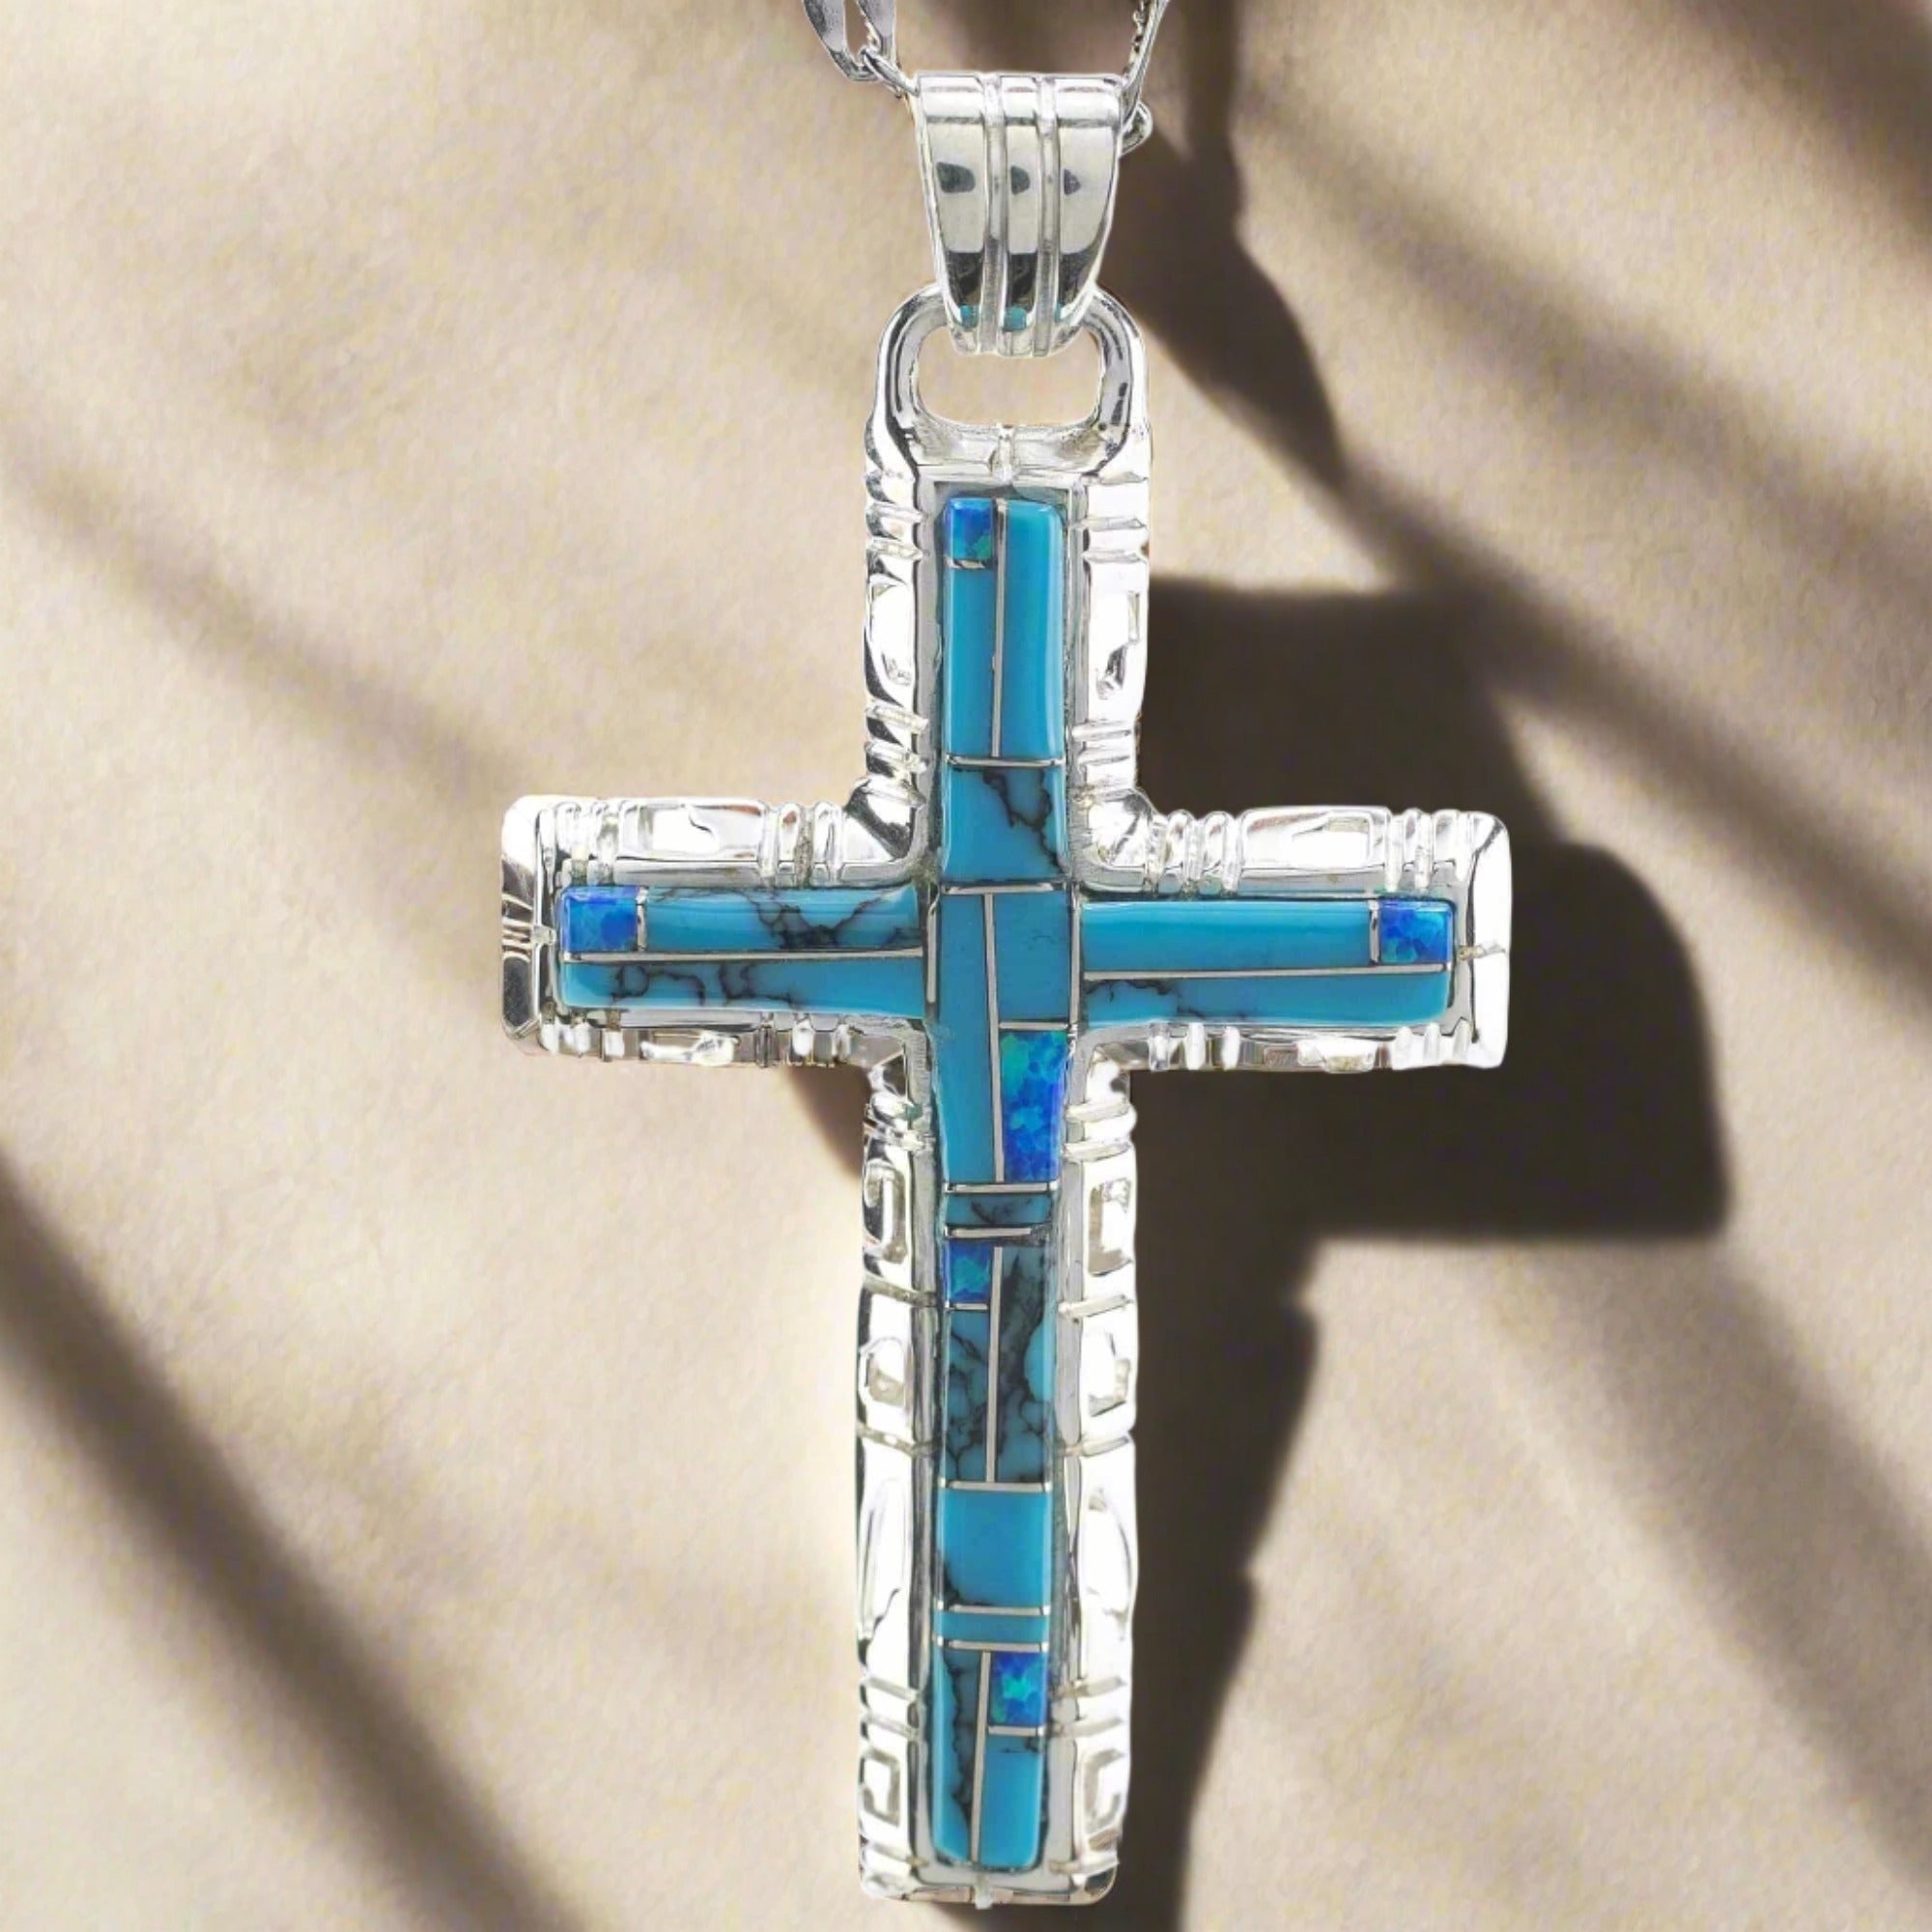 Kalifano Southwest Silver Jewelry Turquoise Cross 925 Sterling Silver Pendant USA Handmade with Opal Accent NMN.0587.TQ